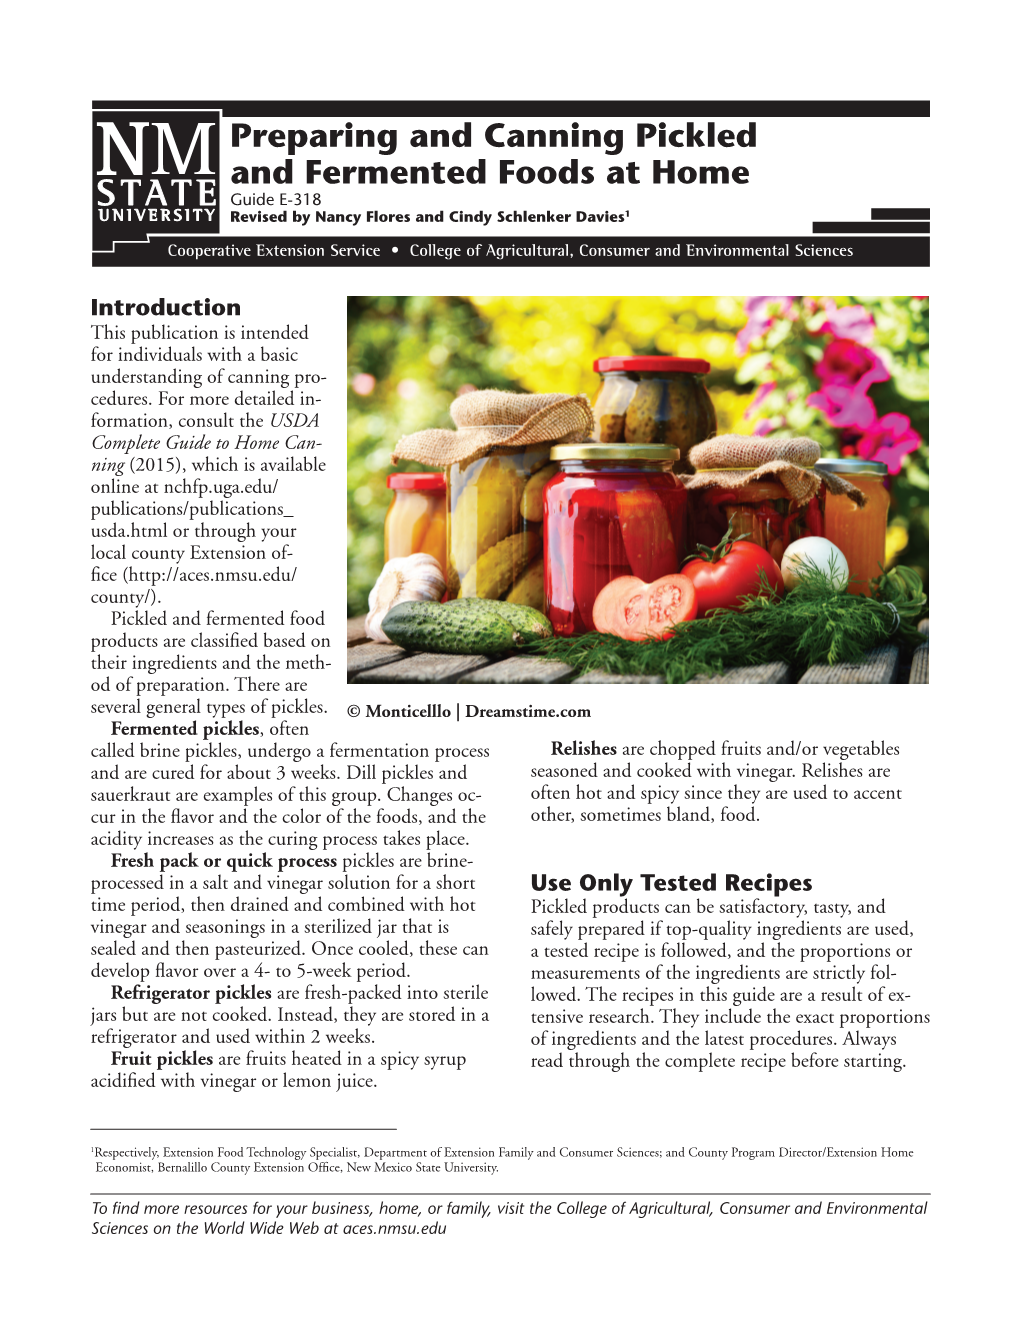 Preparing and Canning Pickled and Fermented Foods at Home Guide E-318 Revised by Nancy Flores and Cindy Schlenker Davies1